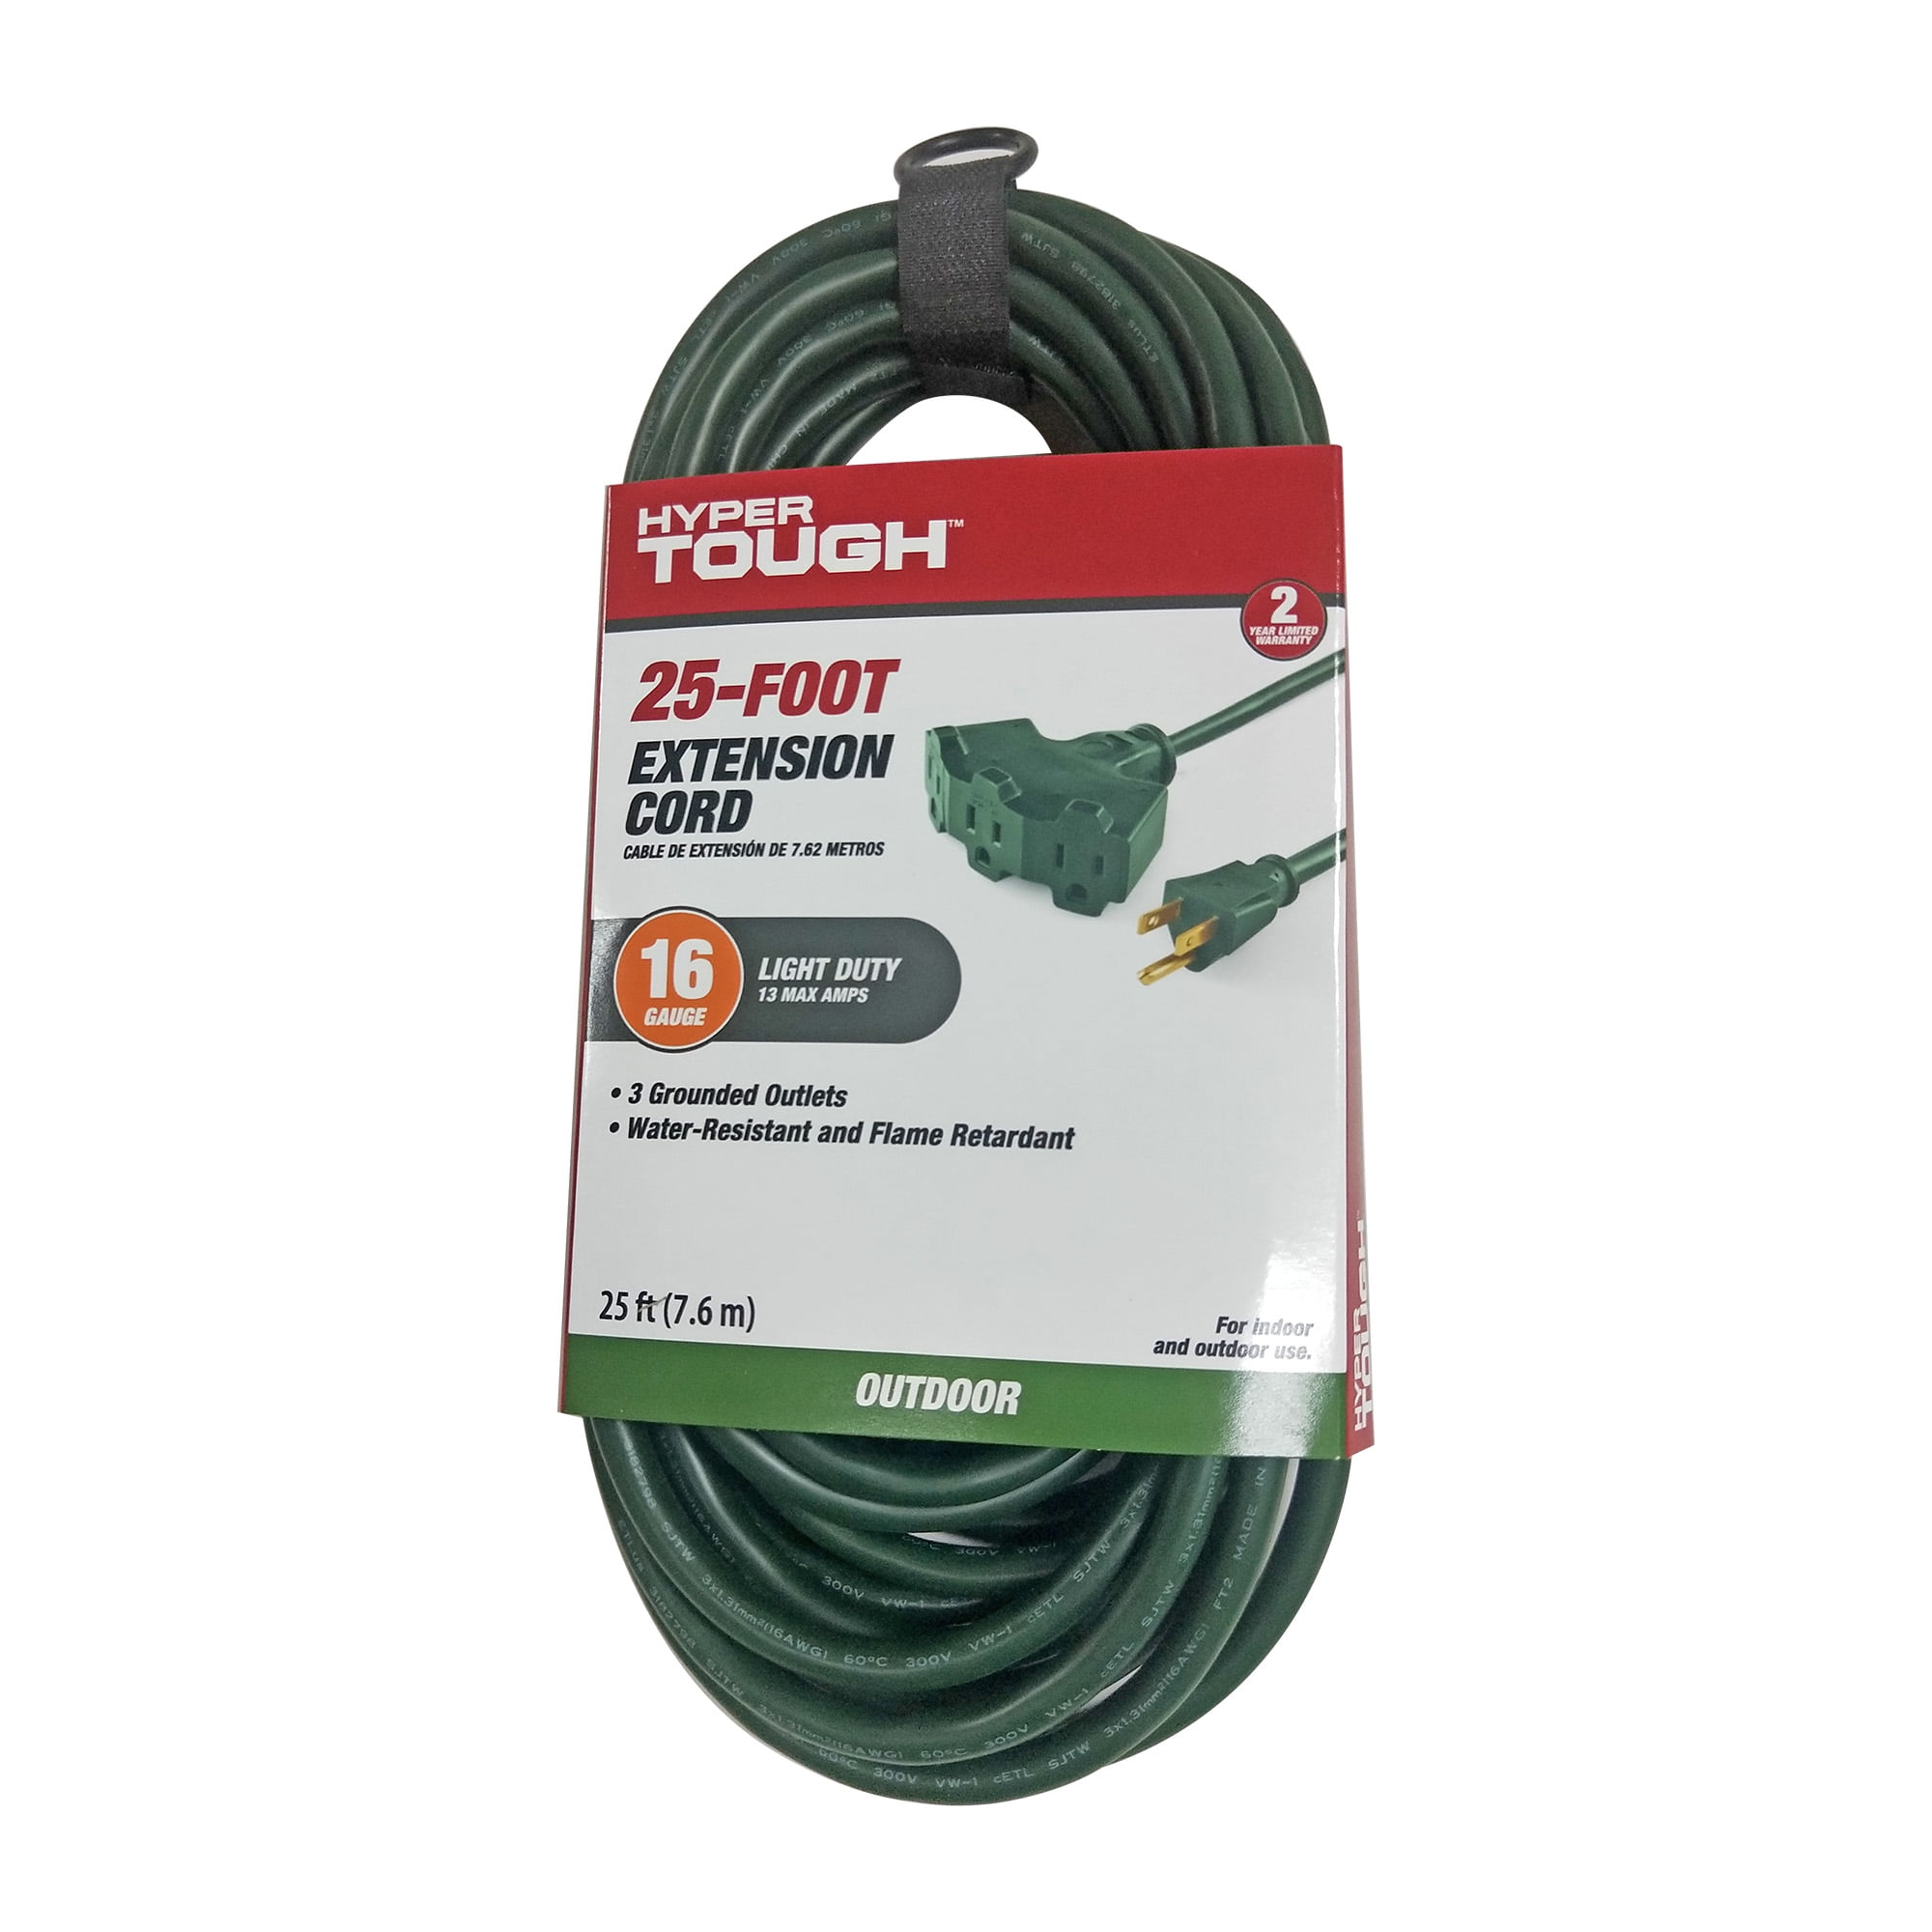 25' 16/3 Green Outdoor Extension cord lot of 6. 